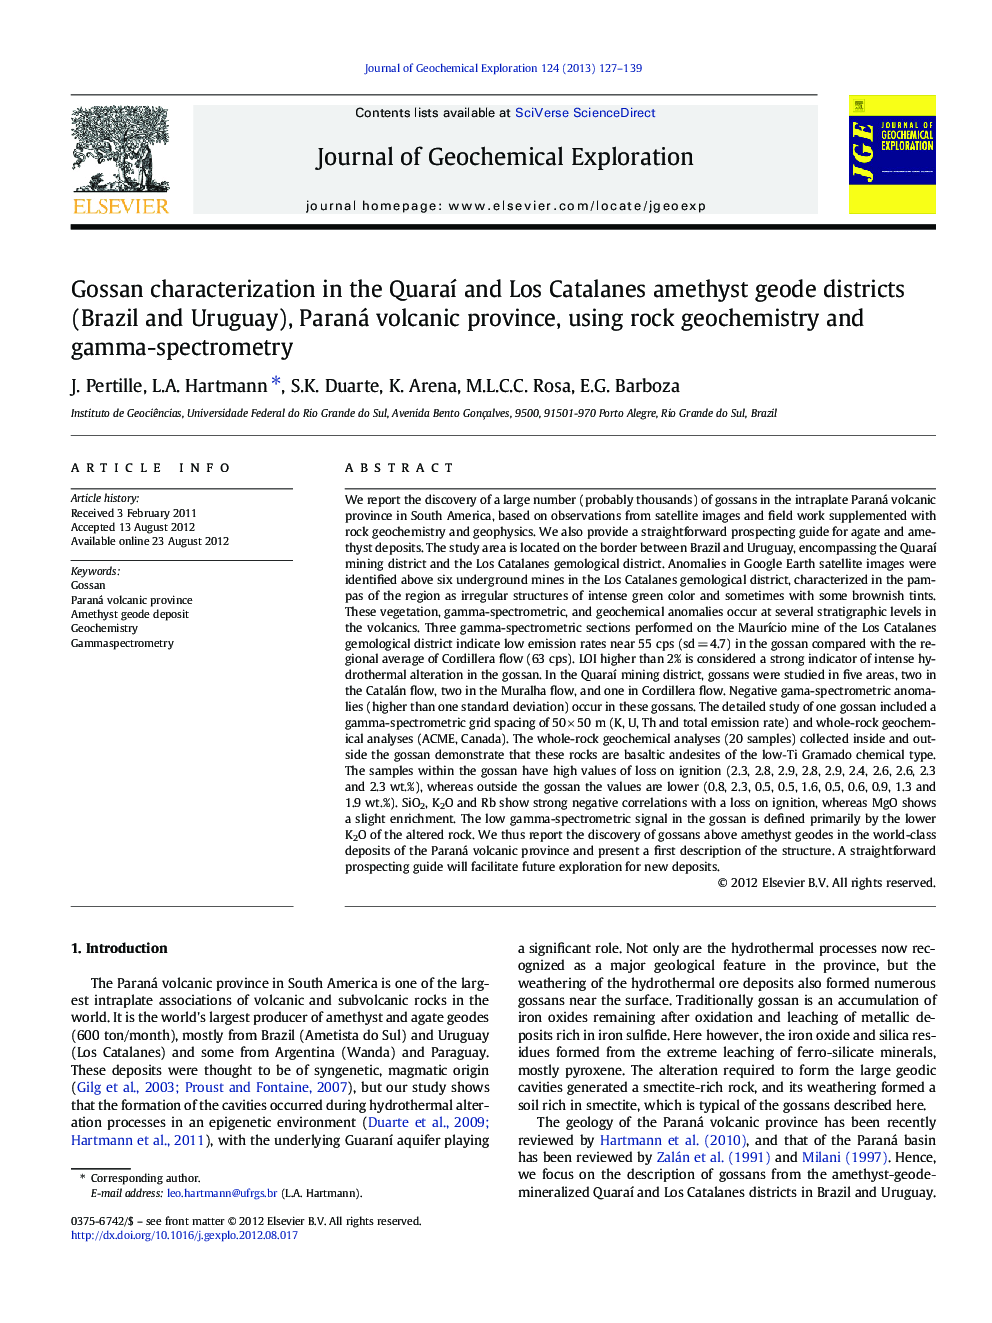 Gossan characterization in the Quaraí and Los Catalanes amethyst geode districts (Brazil and Uruguay), Paraná volcanic province, using rock geochemistry and gamma-spectrometry